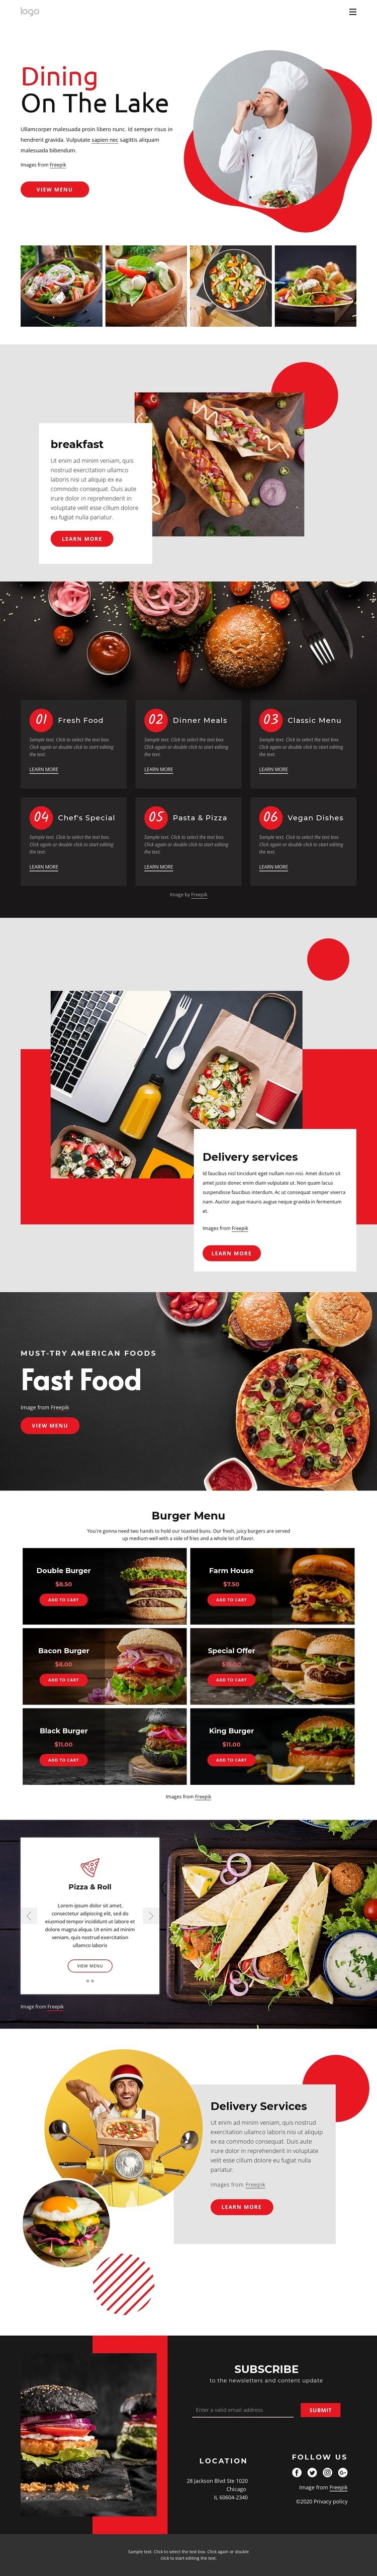 Dining on the lake Webflow Template Alternative